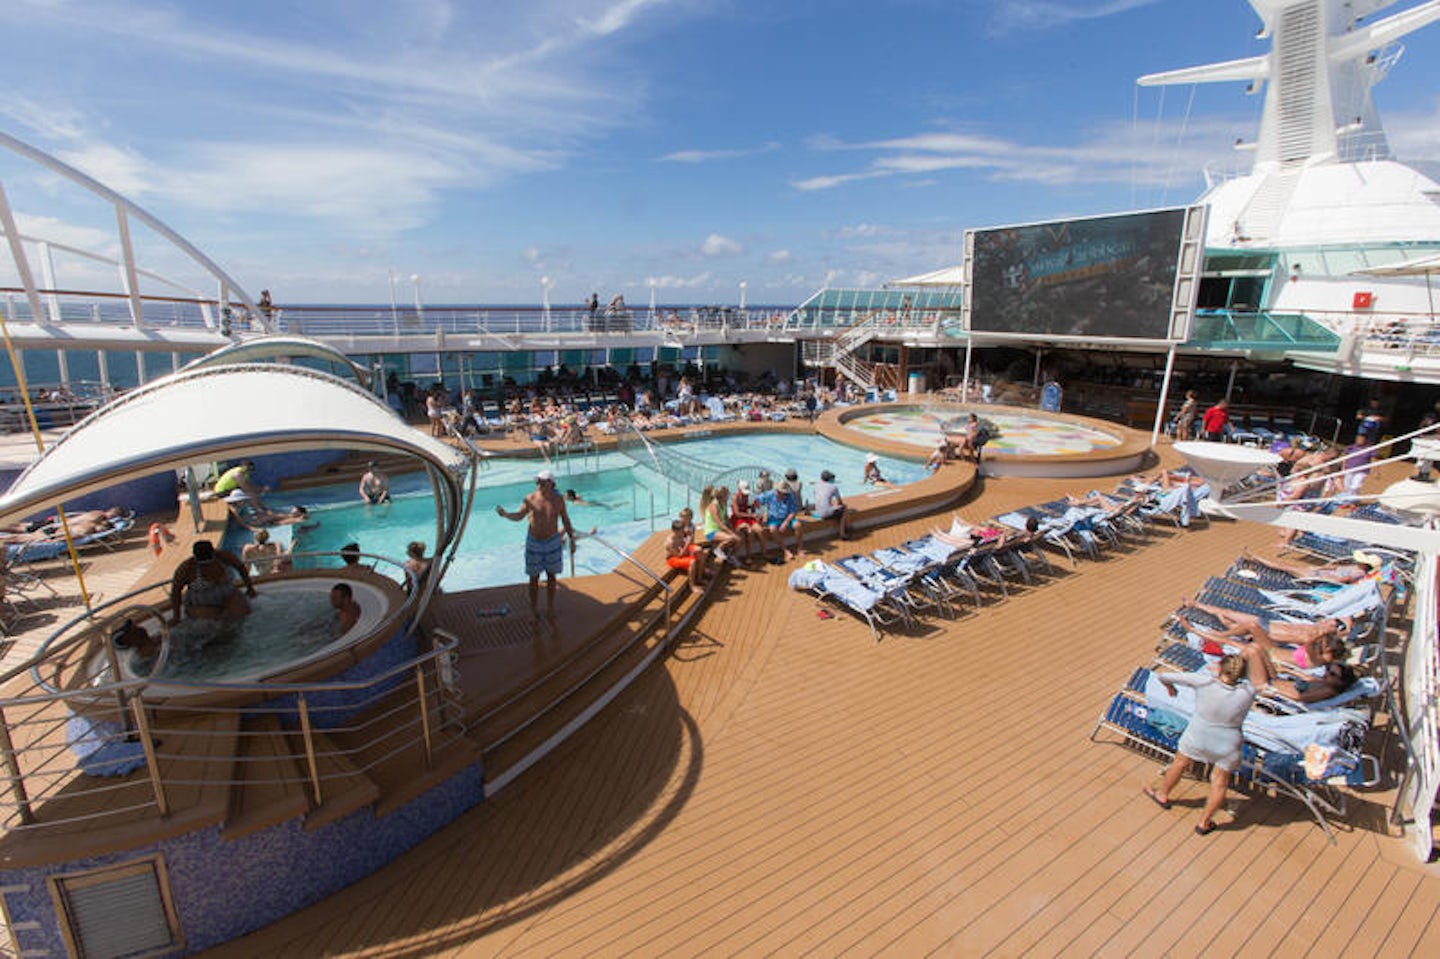 The Main Pool on Enchantment of the Seas